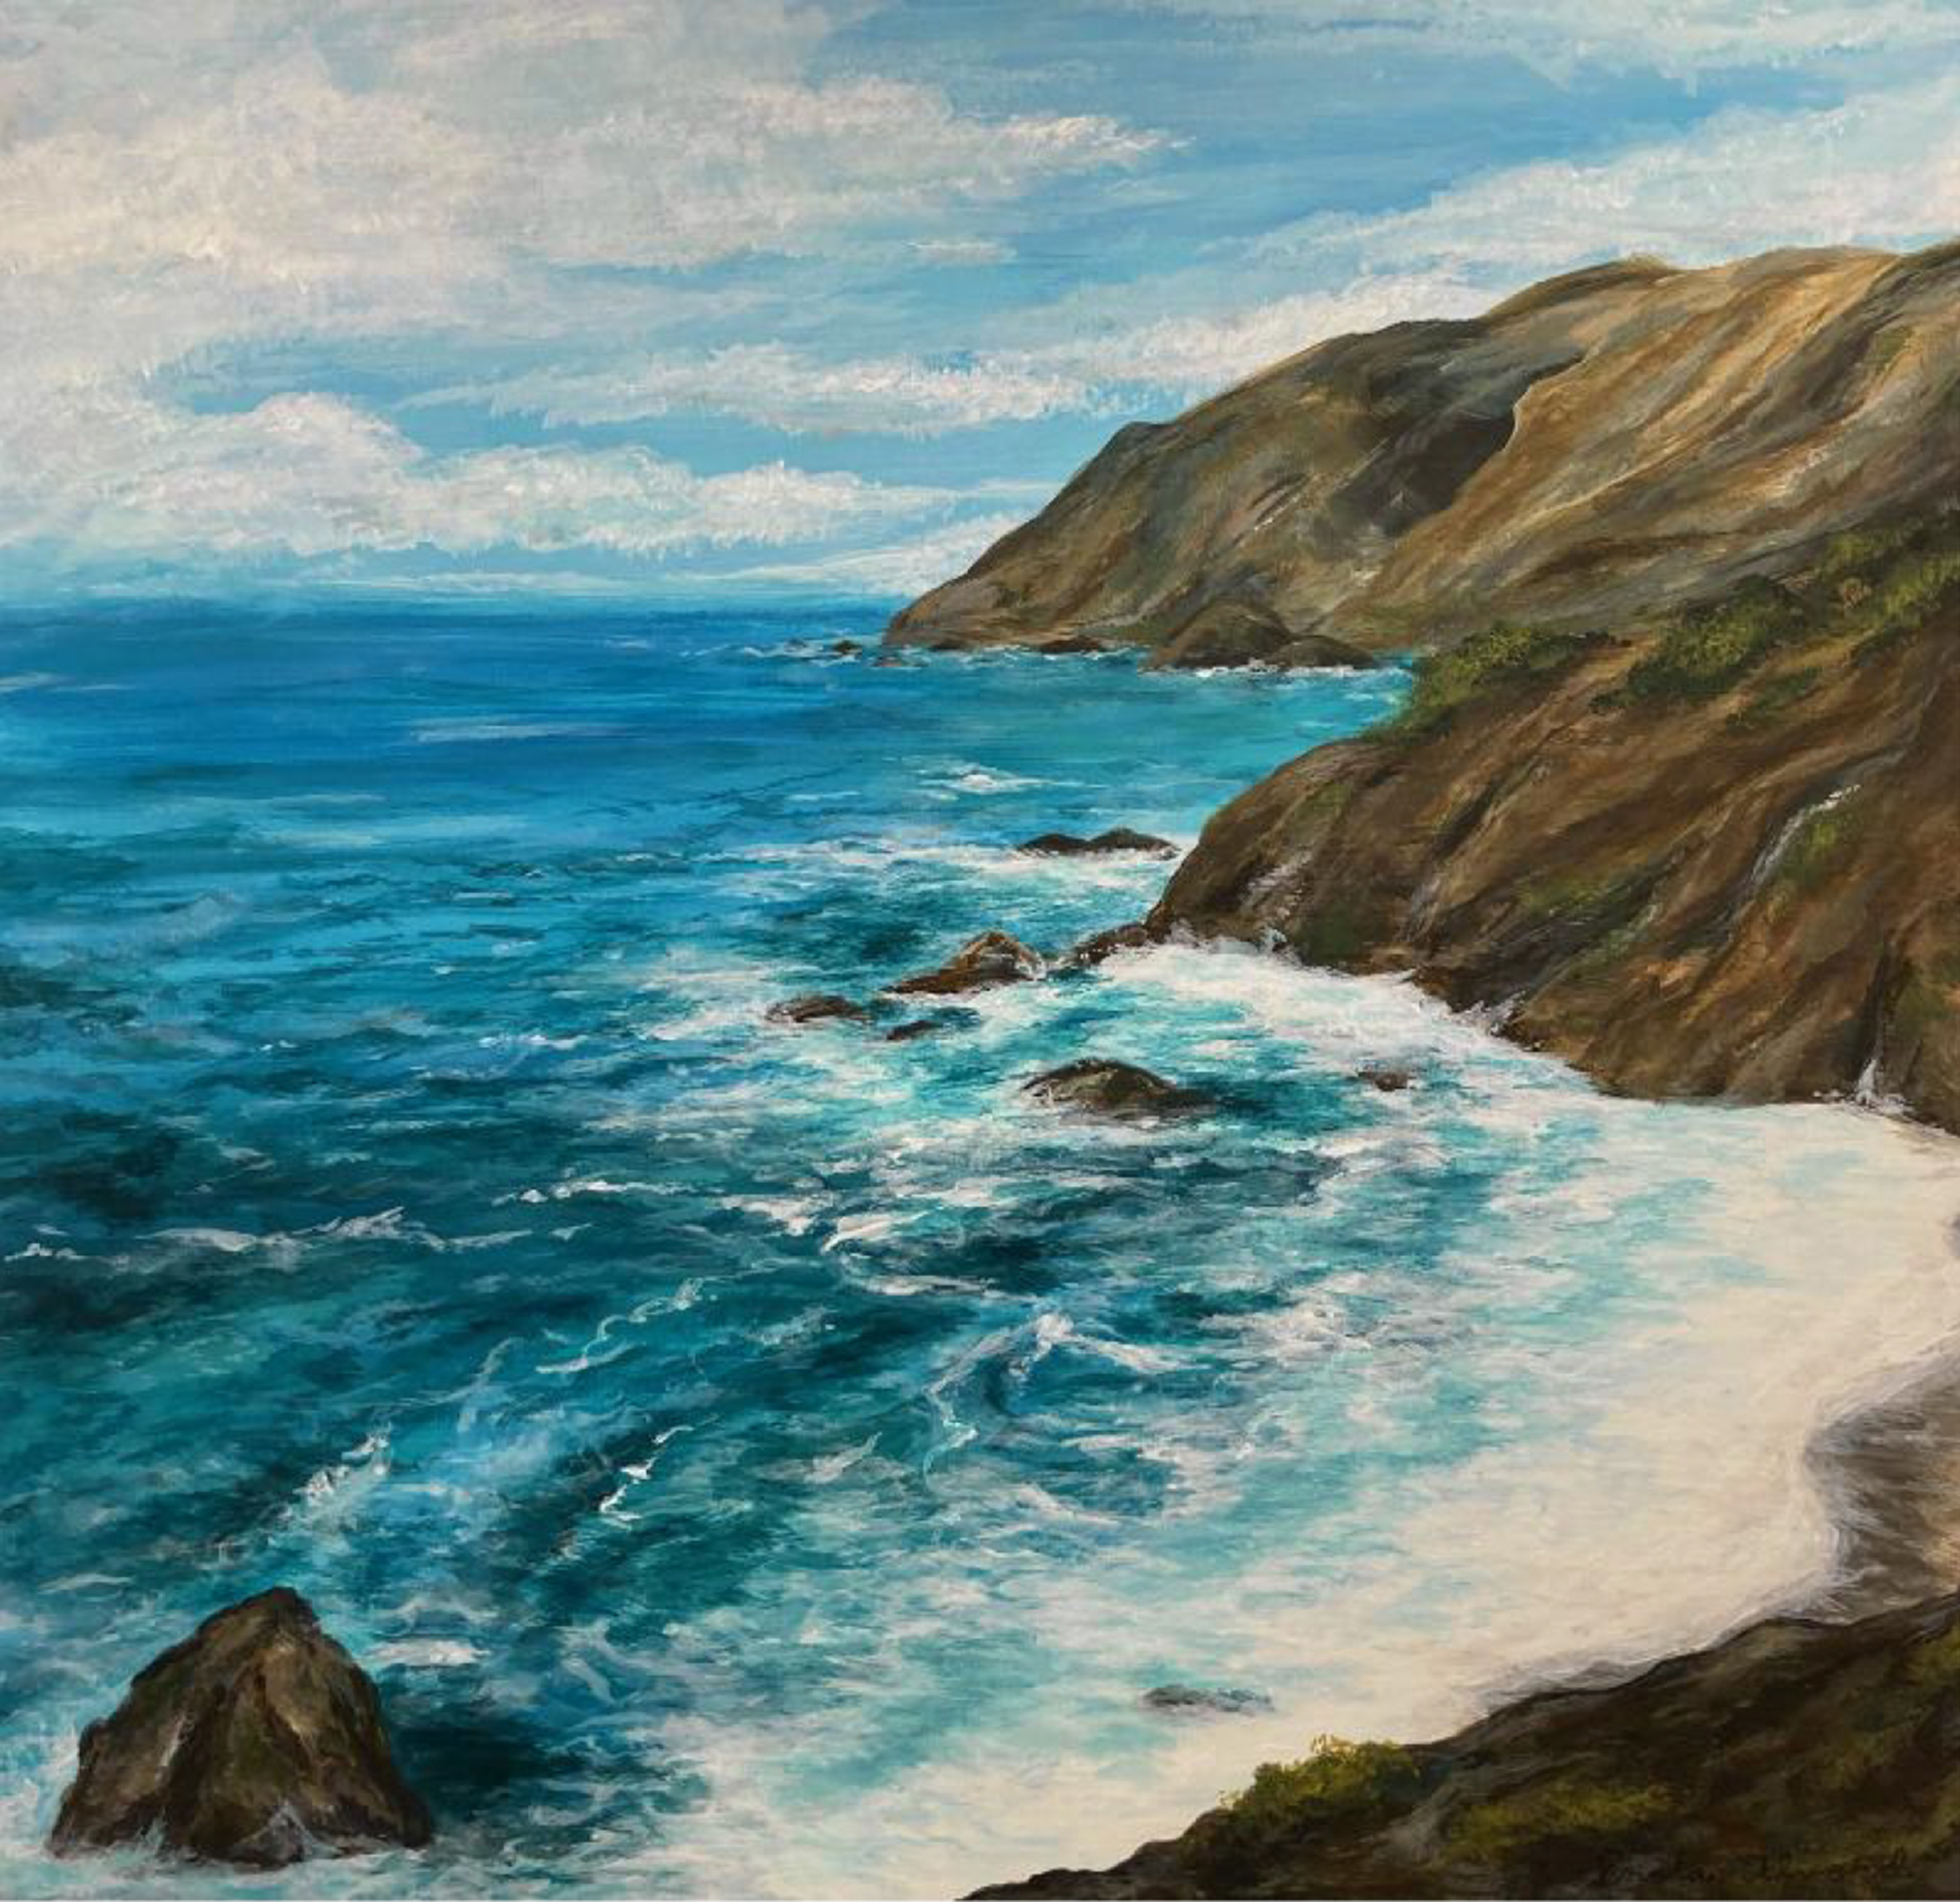 Painting of a rocky coastline